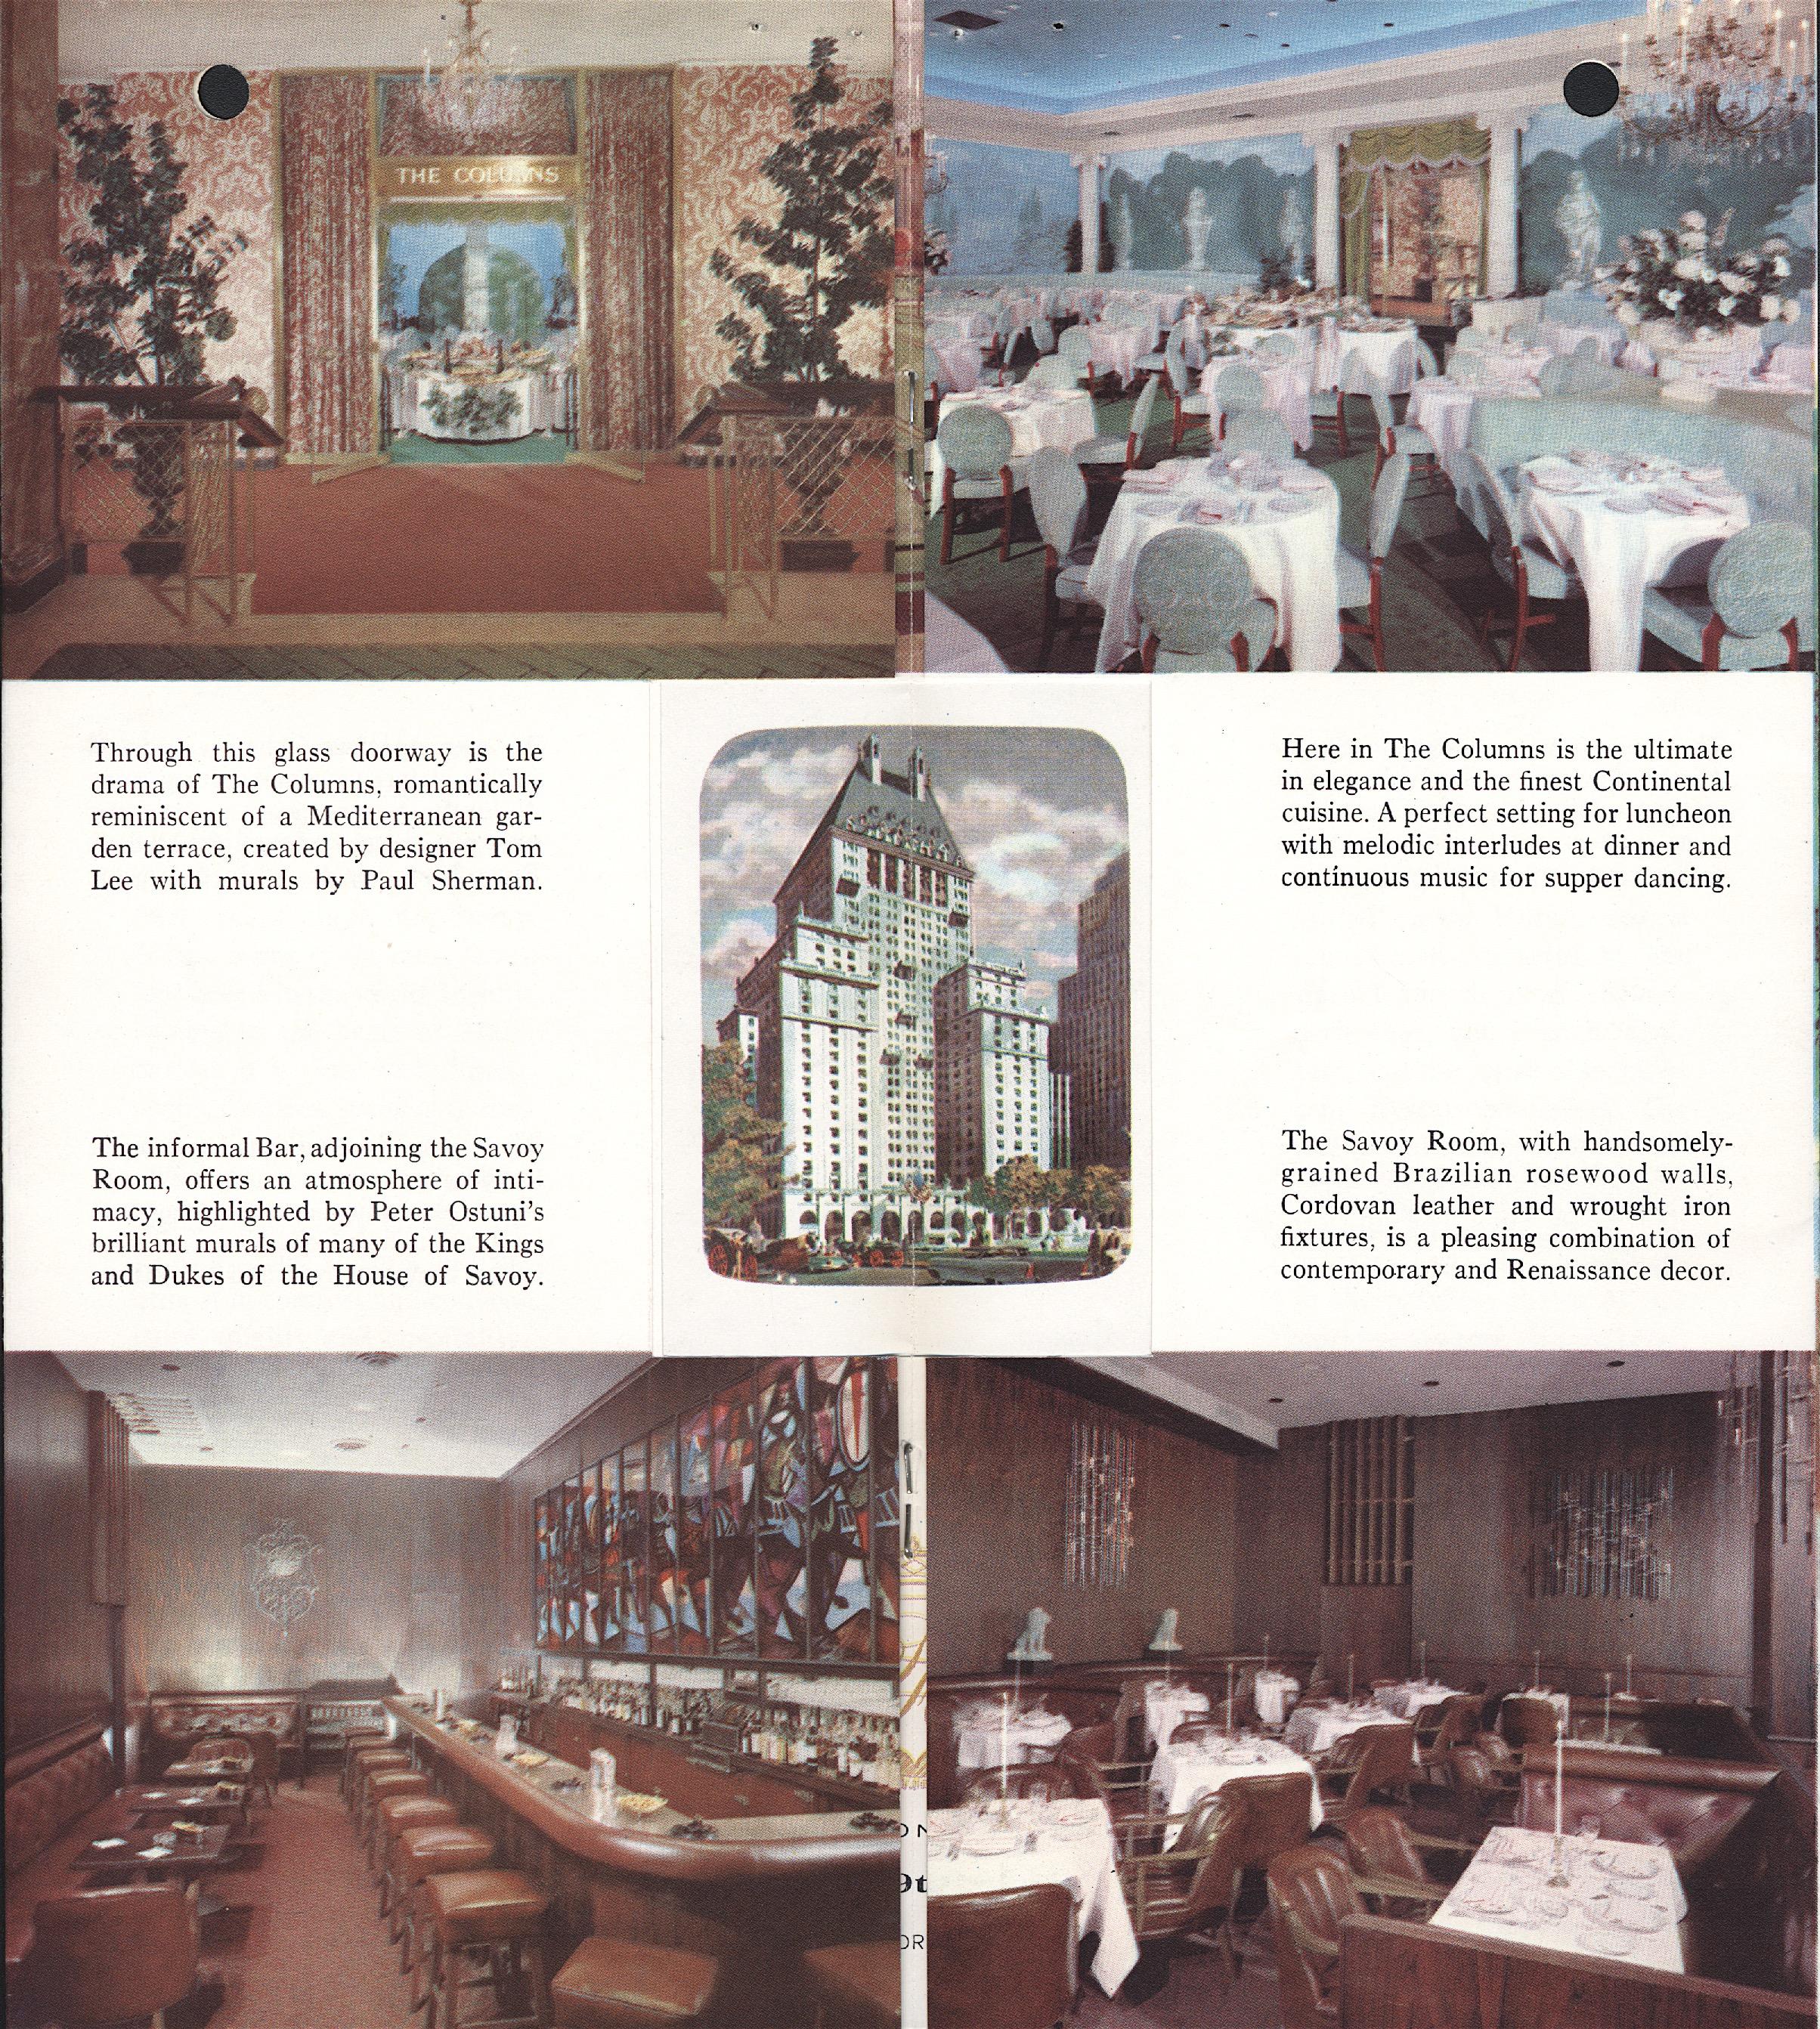 Mid-Century Modern King Arthur Mural (16' x 6') by Peter Ostuni for Savoy-Plaza Hotel 1951 For Sale